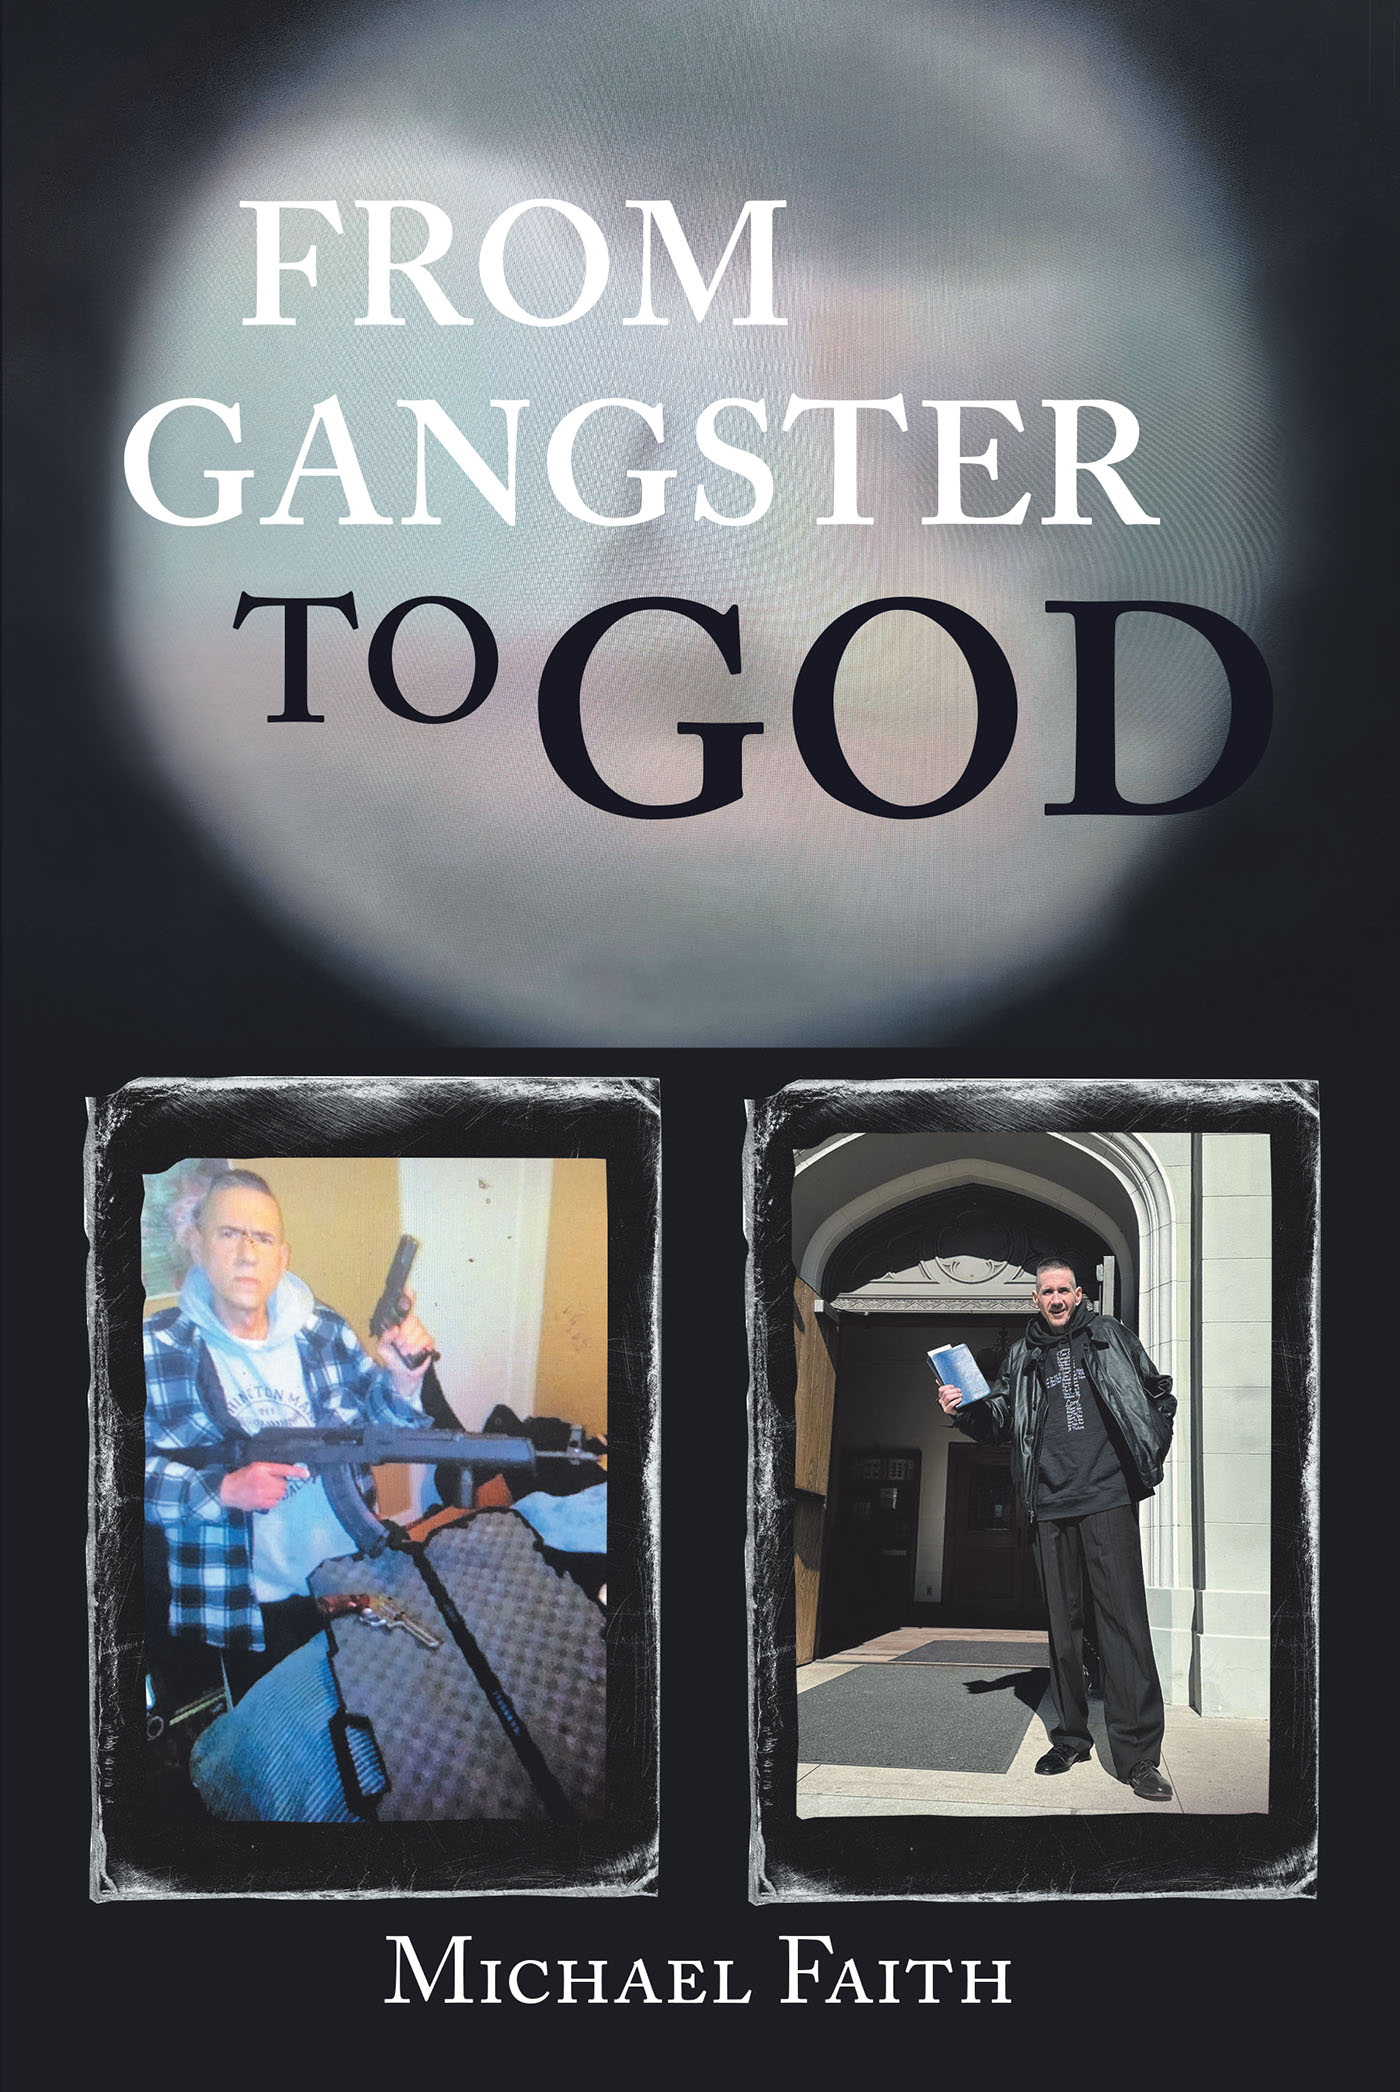 Michael Faith’s Newly Released "From Gangster to God" is an Engaging Memoir That Explores the Author’s Journey Out of the Criminal Element